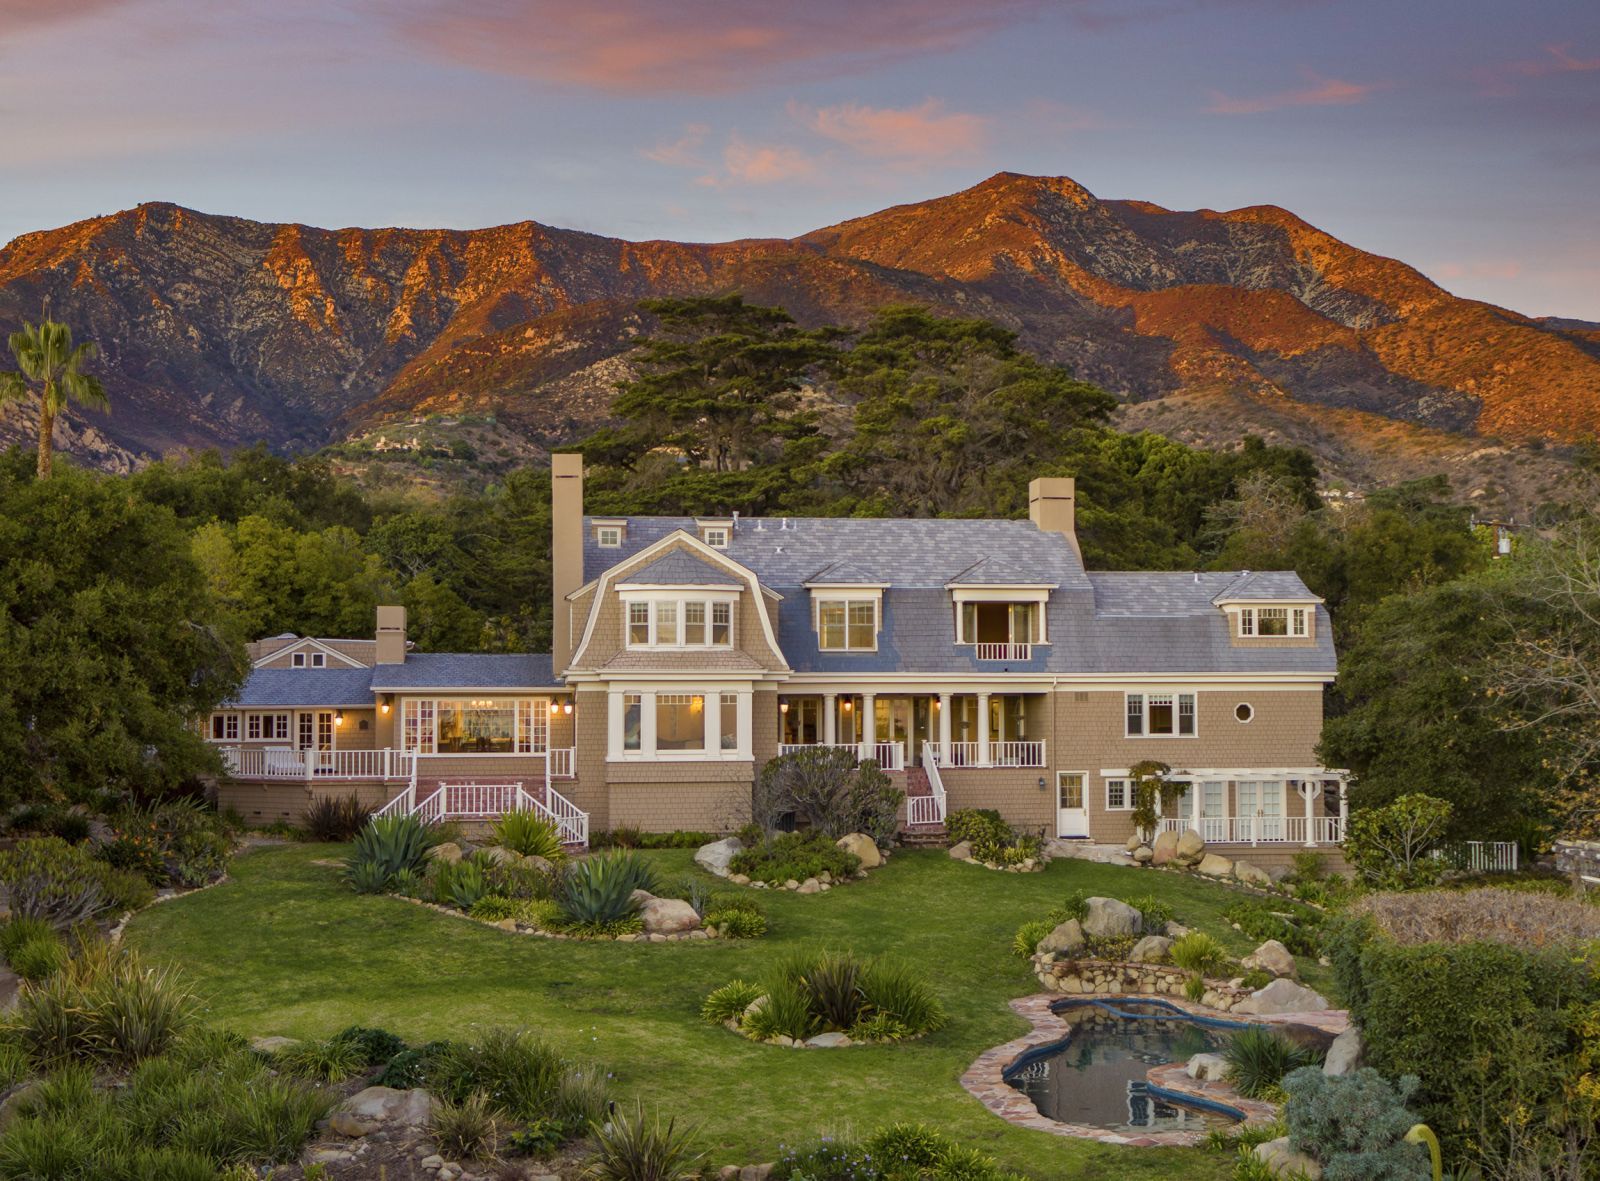 The exterior of a large Cape-Cod Style home in Montecito, with a sprawling lawn in front and mountains in the background glowing orange at duskns